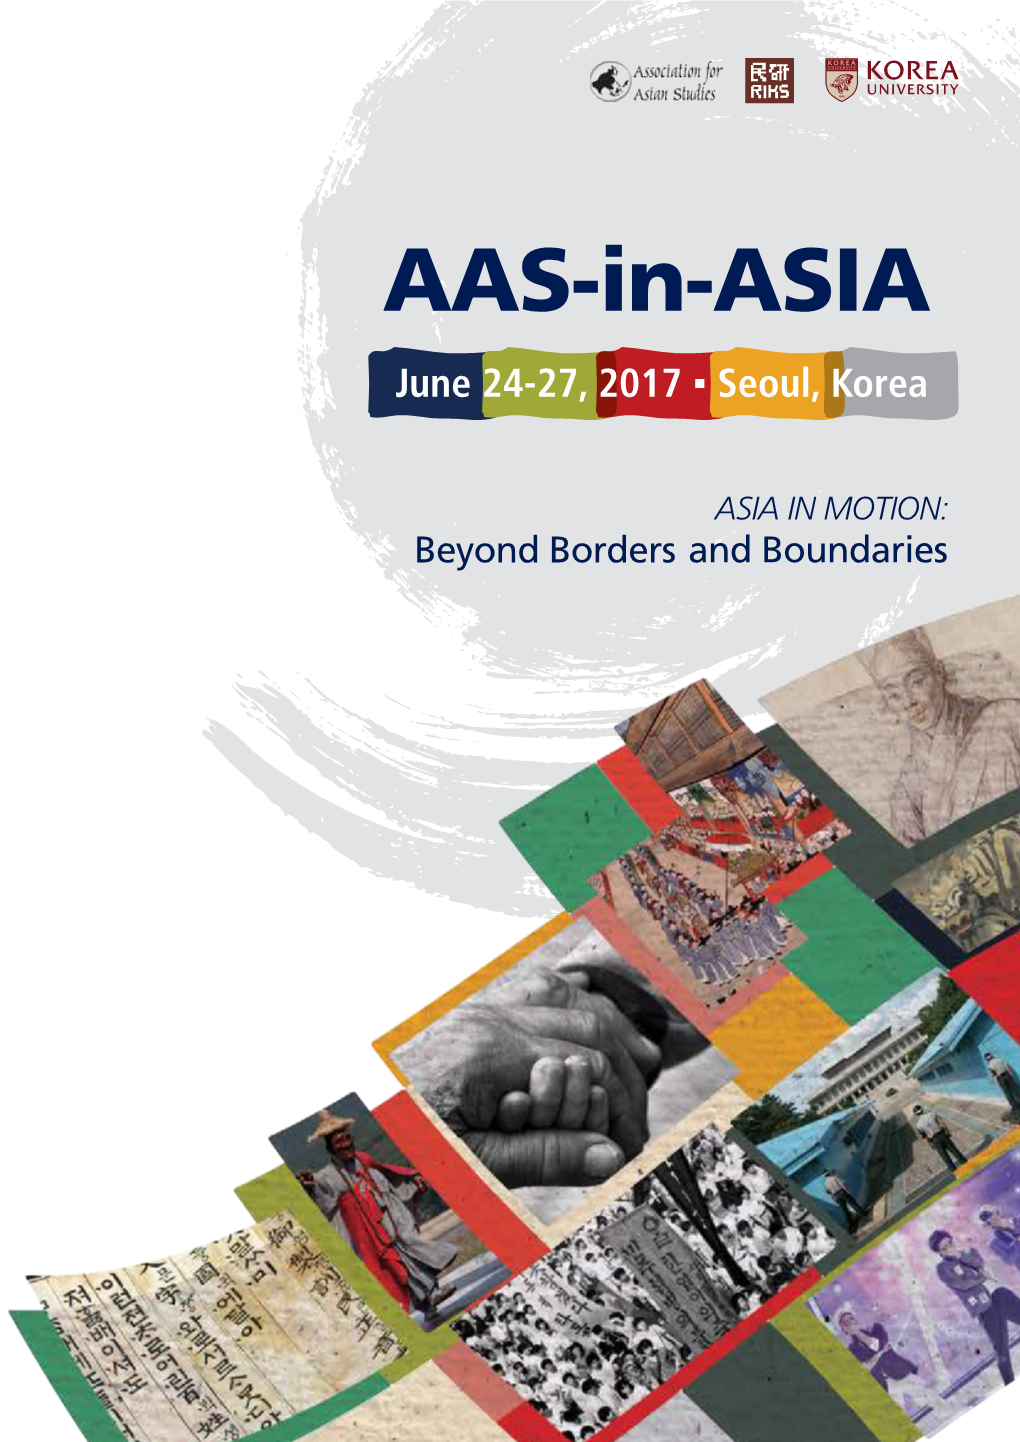 AAS-In-ASIA CONFERENCE